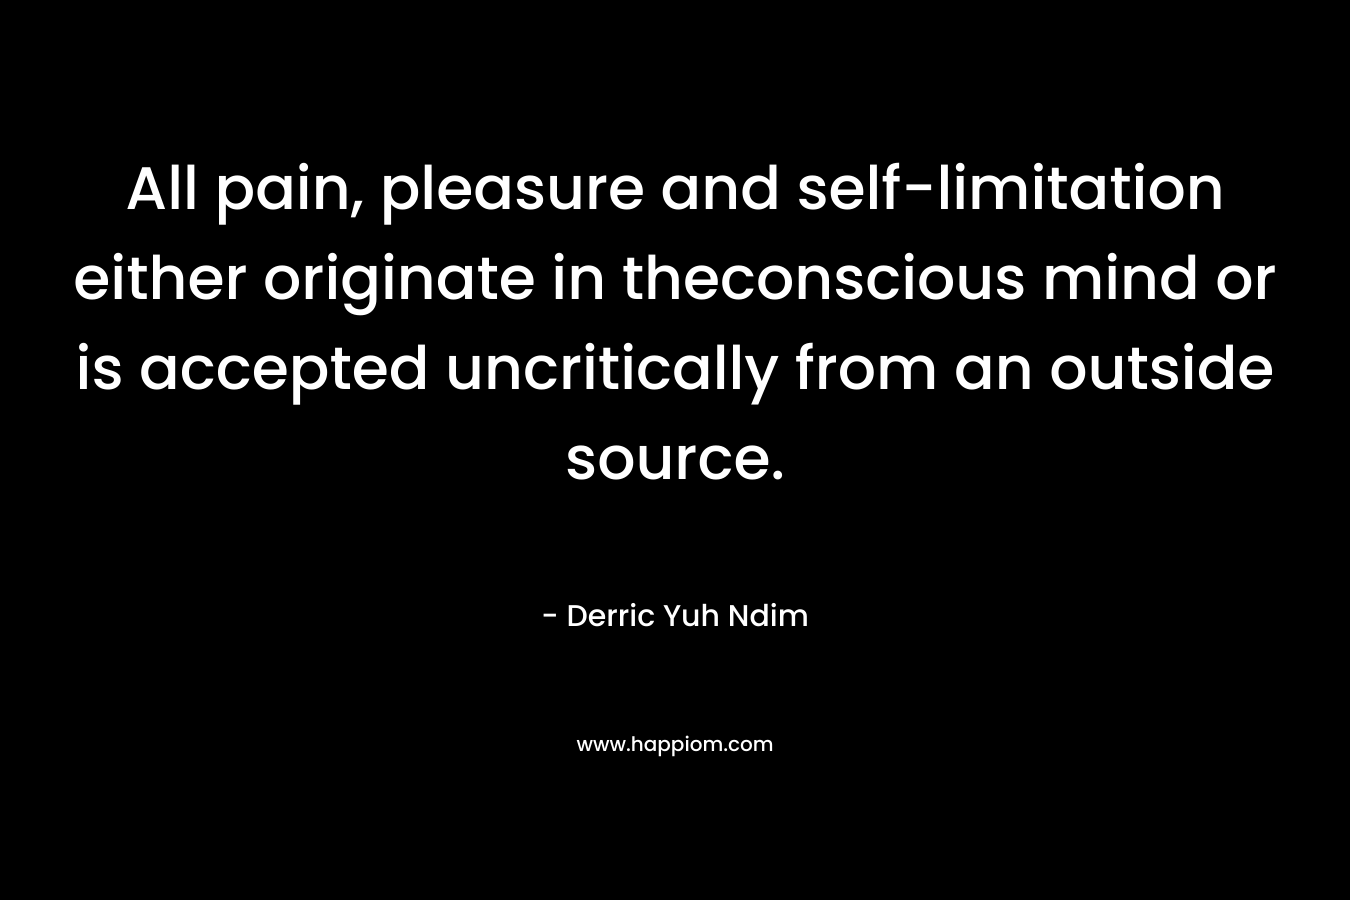 All pain, pleasure and self-limitation either originate in theconscious mind or is accepted uncritically from an outside source. – Derric Yuh Ndim